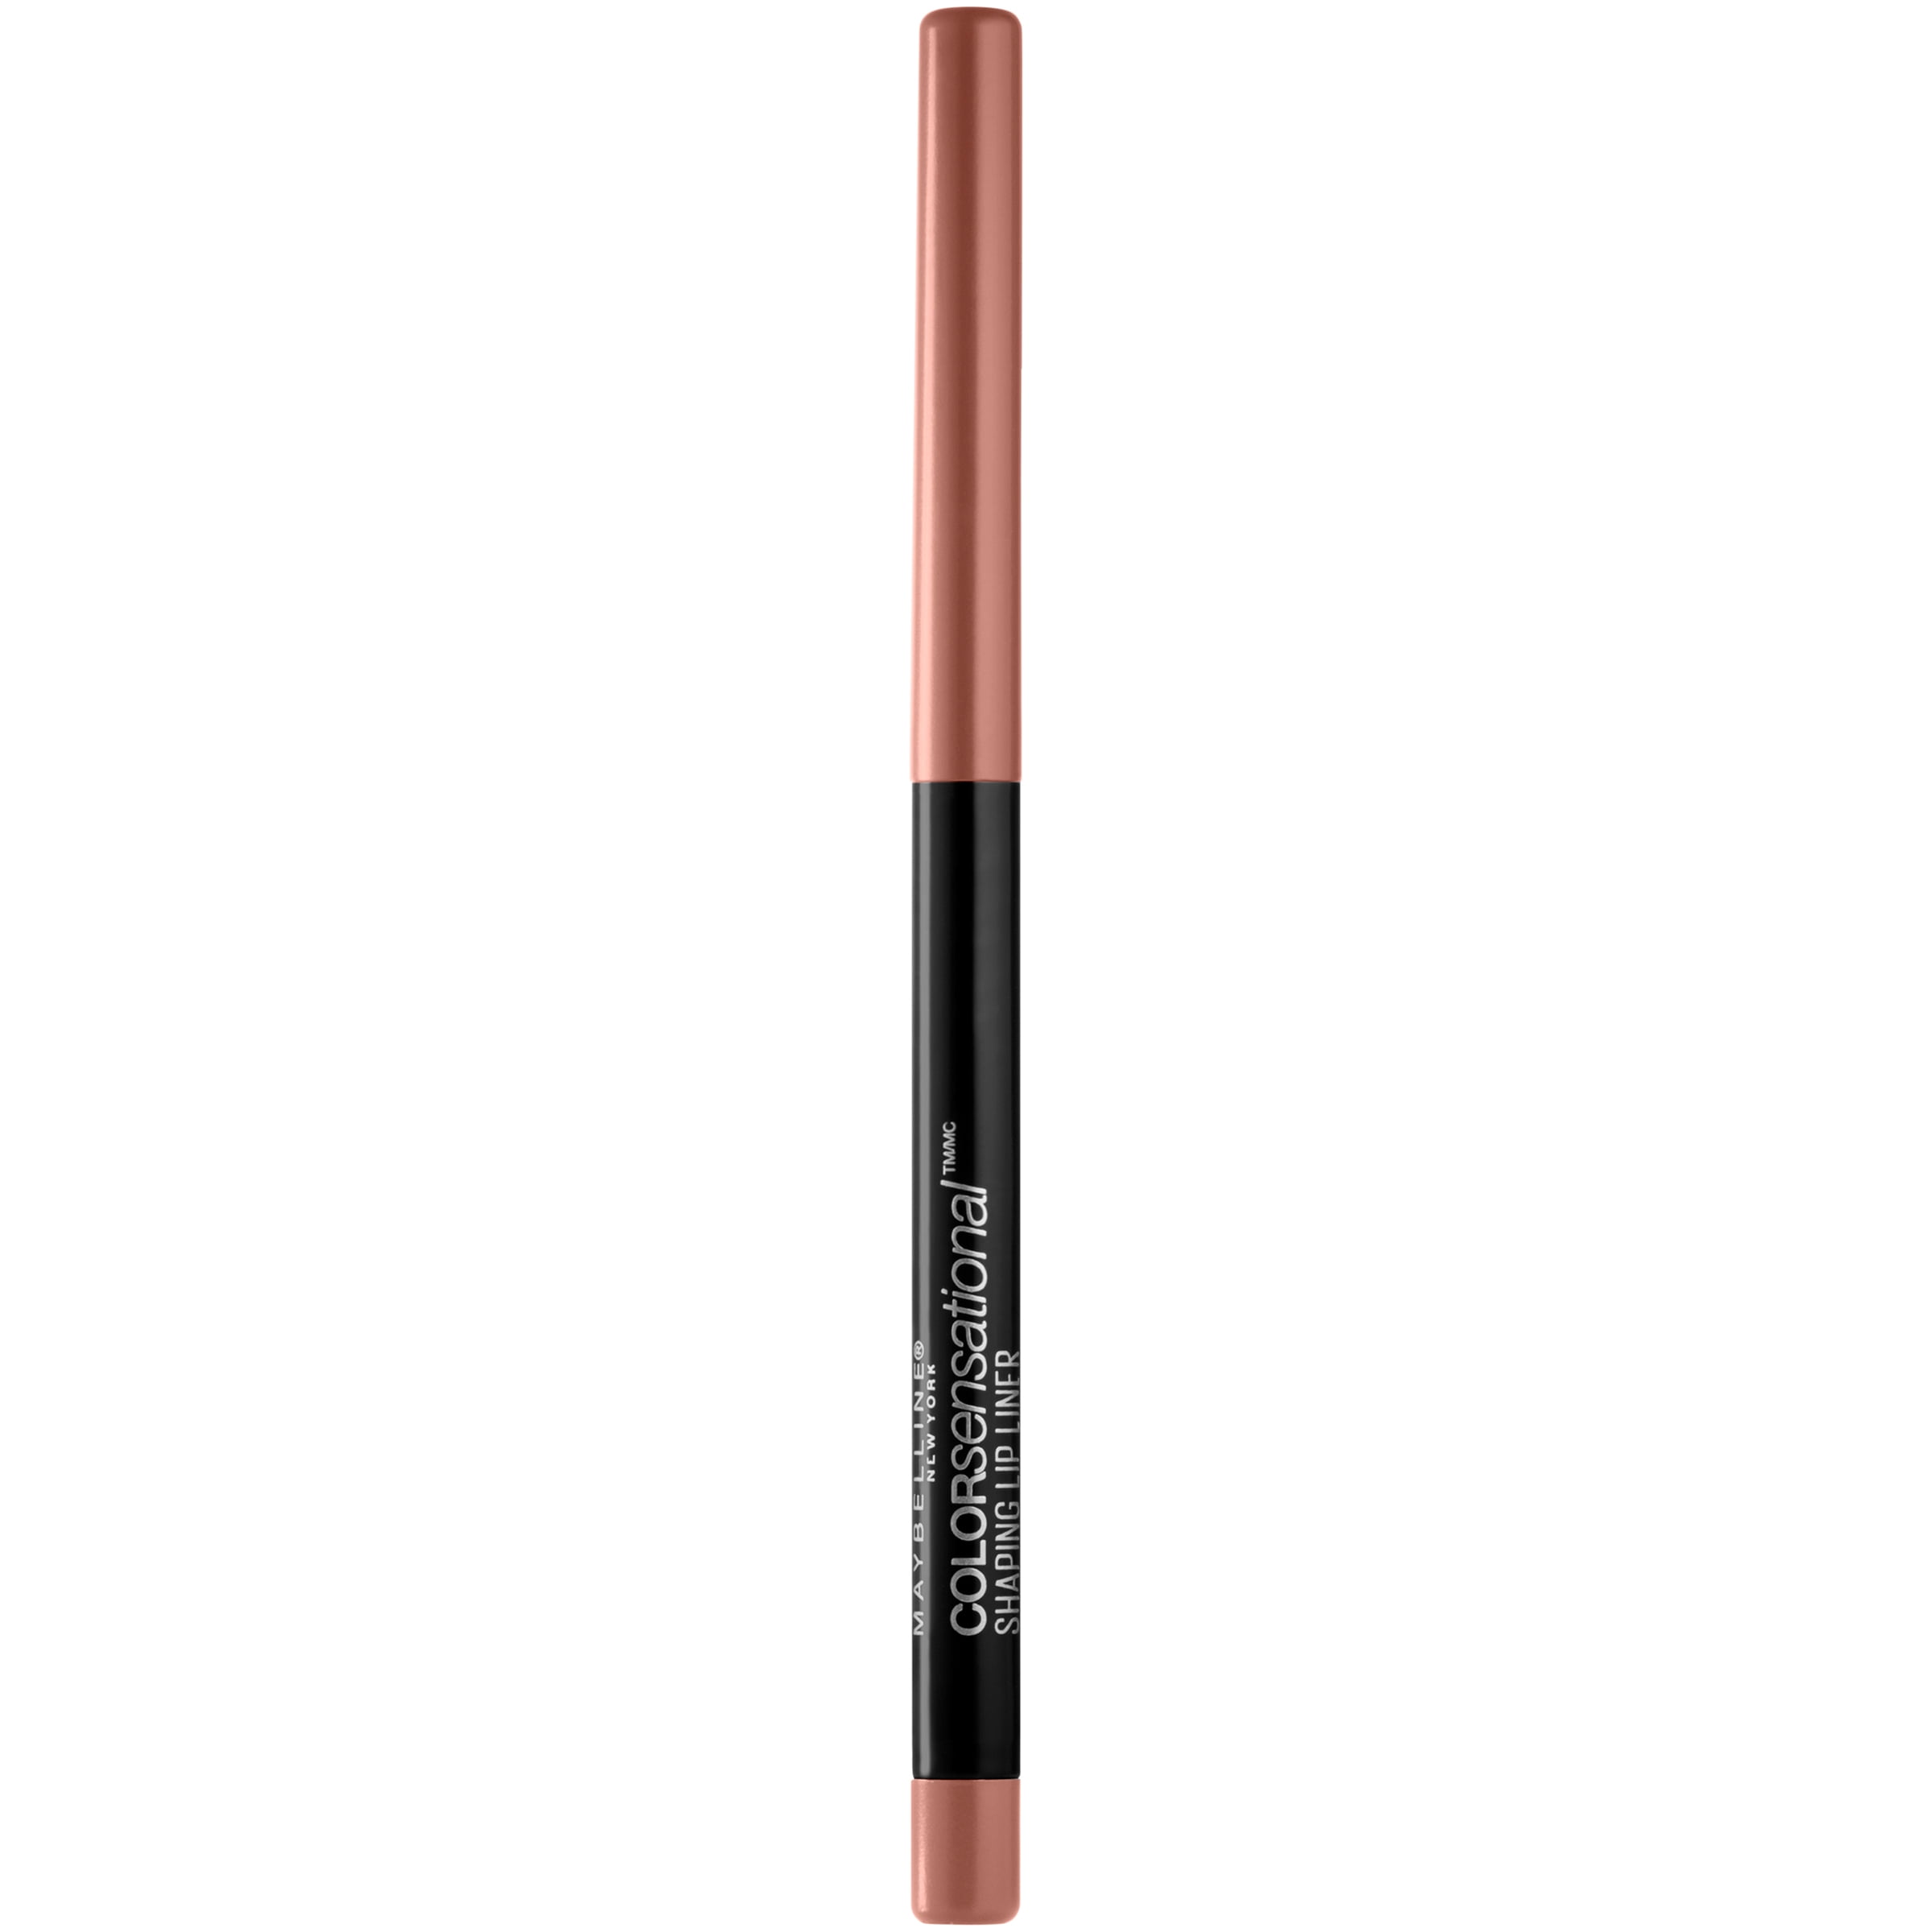 Maybelline Color Sensational Shaping Lip Liner Makeup, Raw Chocolate, 0.01  oz.